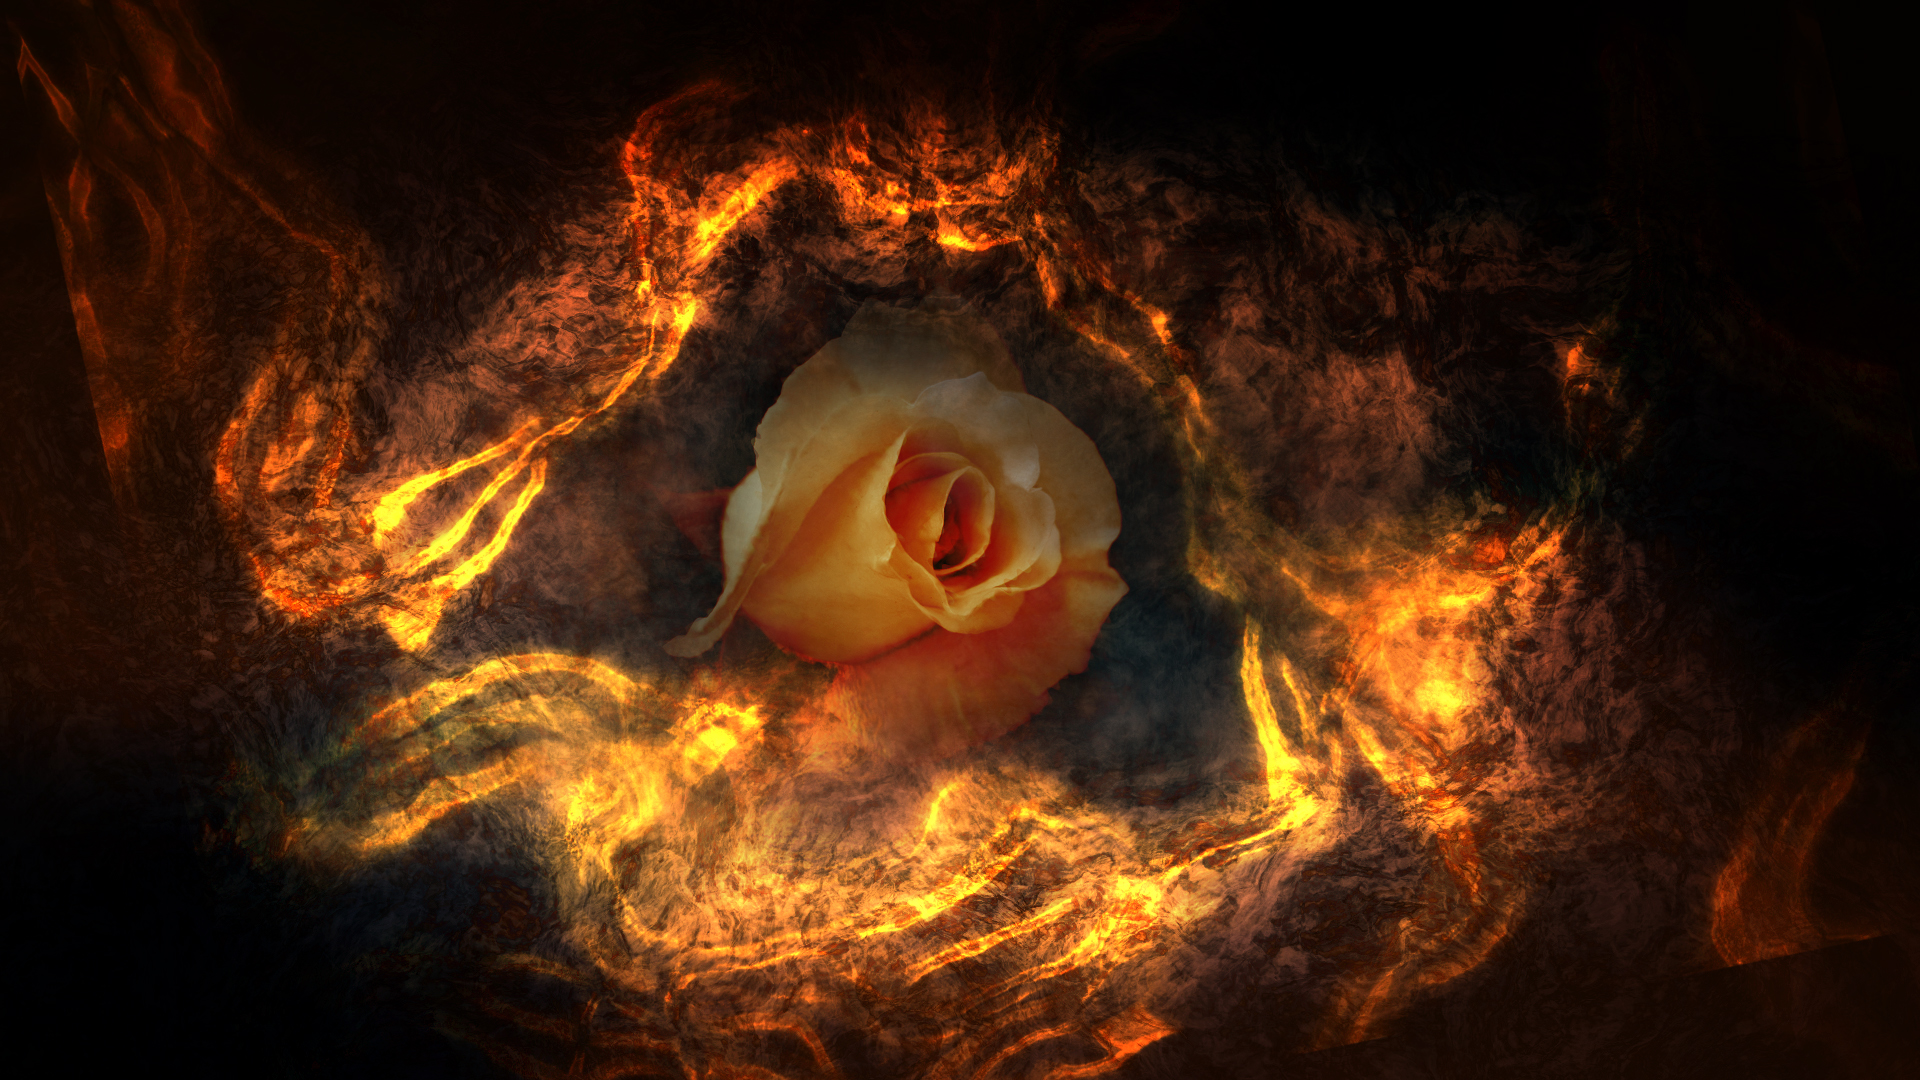 Wallpaper fire rose Download free picture 17588